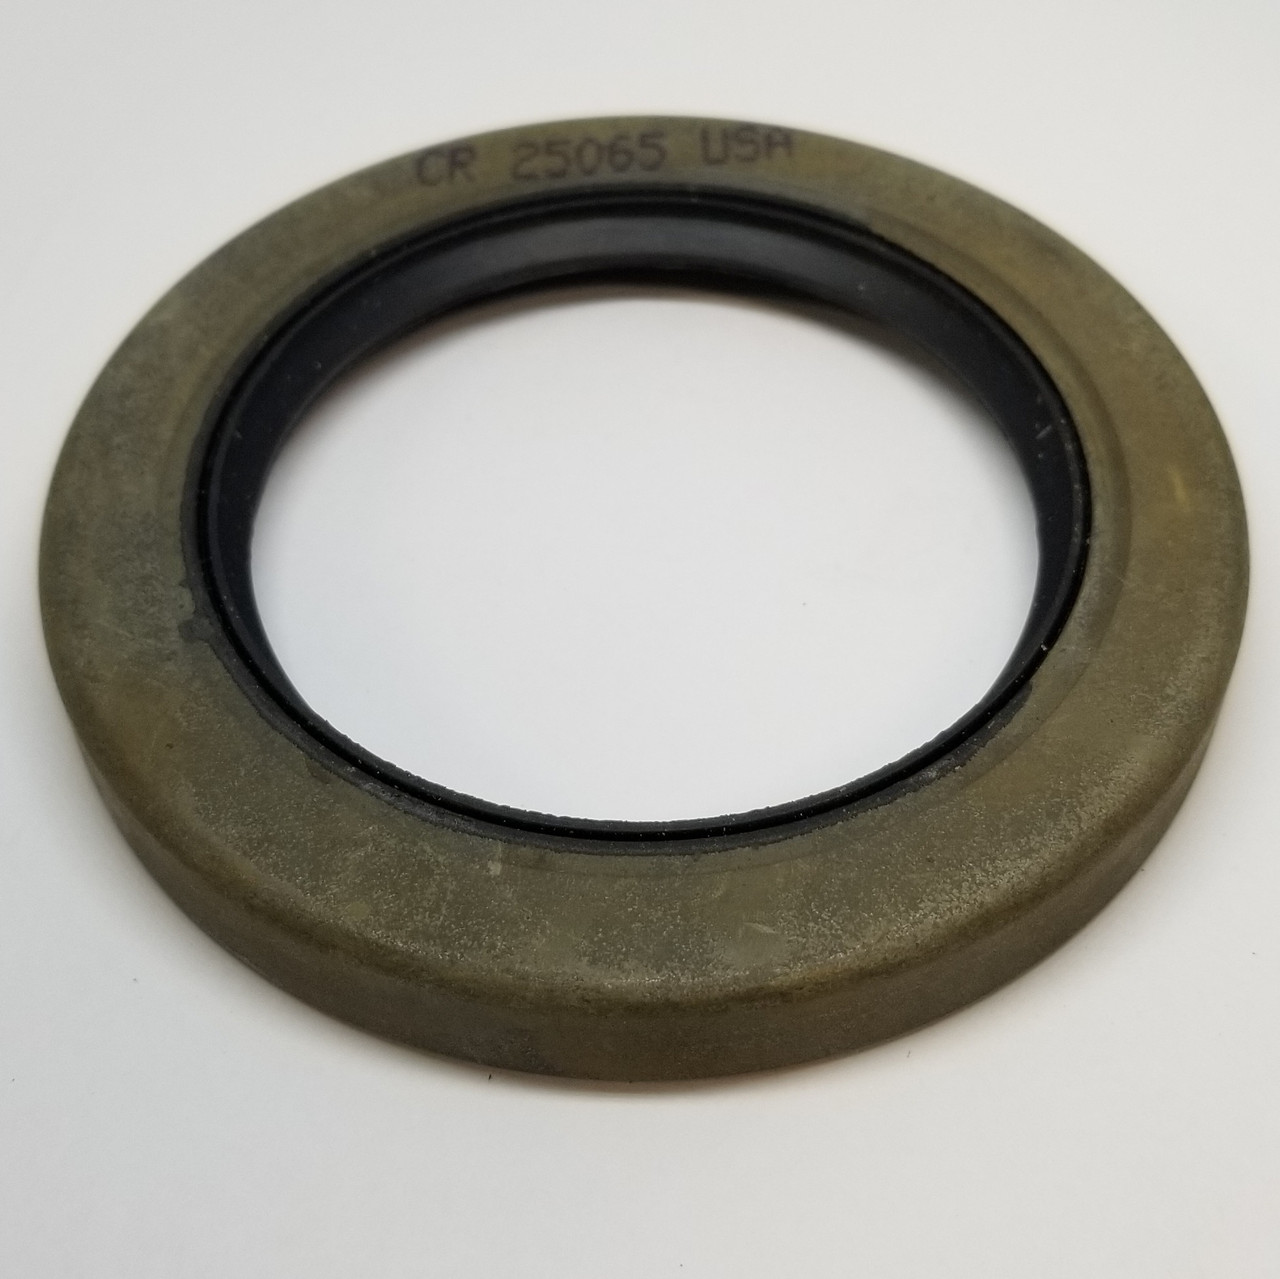 7.00" (177.8mm) Inch Reinforced Metal Double Lip Nitrile Oil Seal  70034 CRSHA1 R